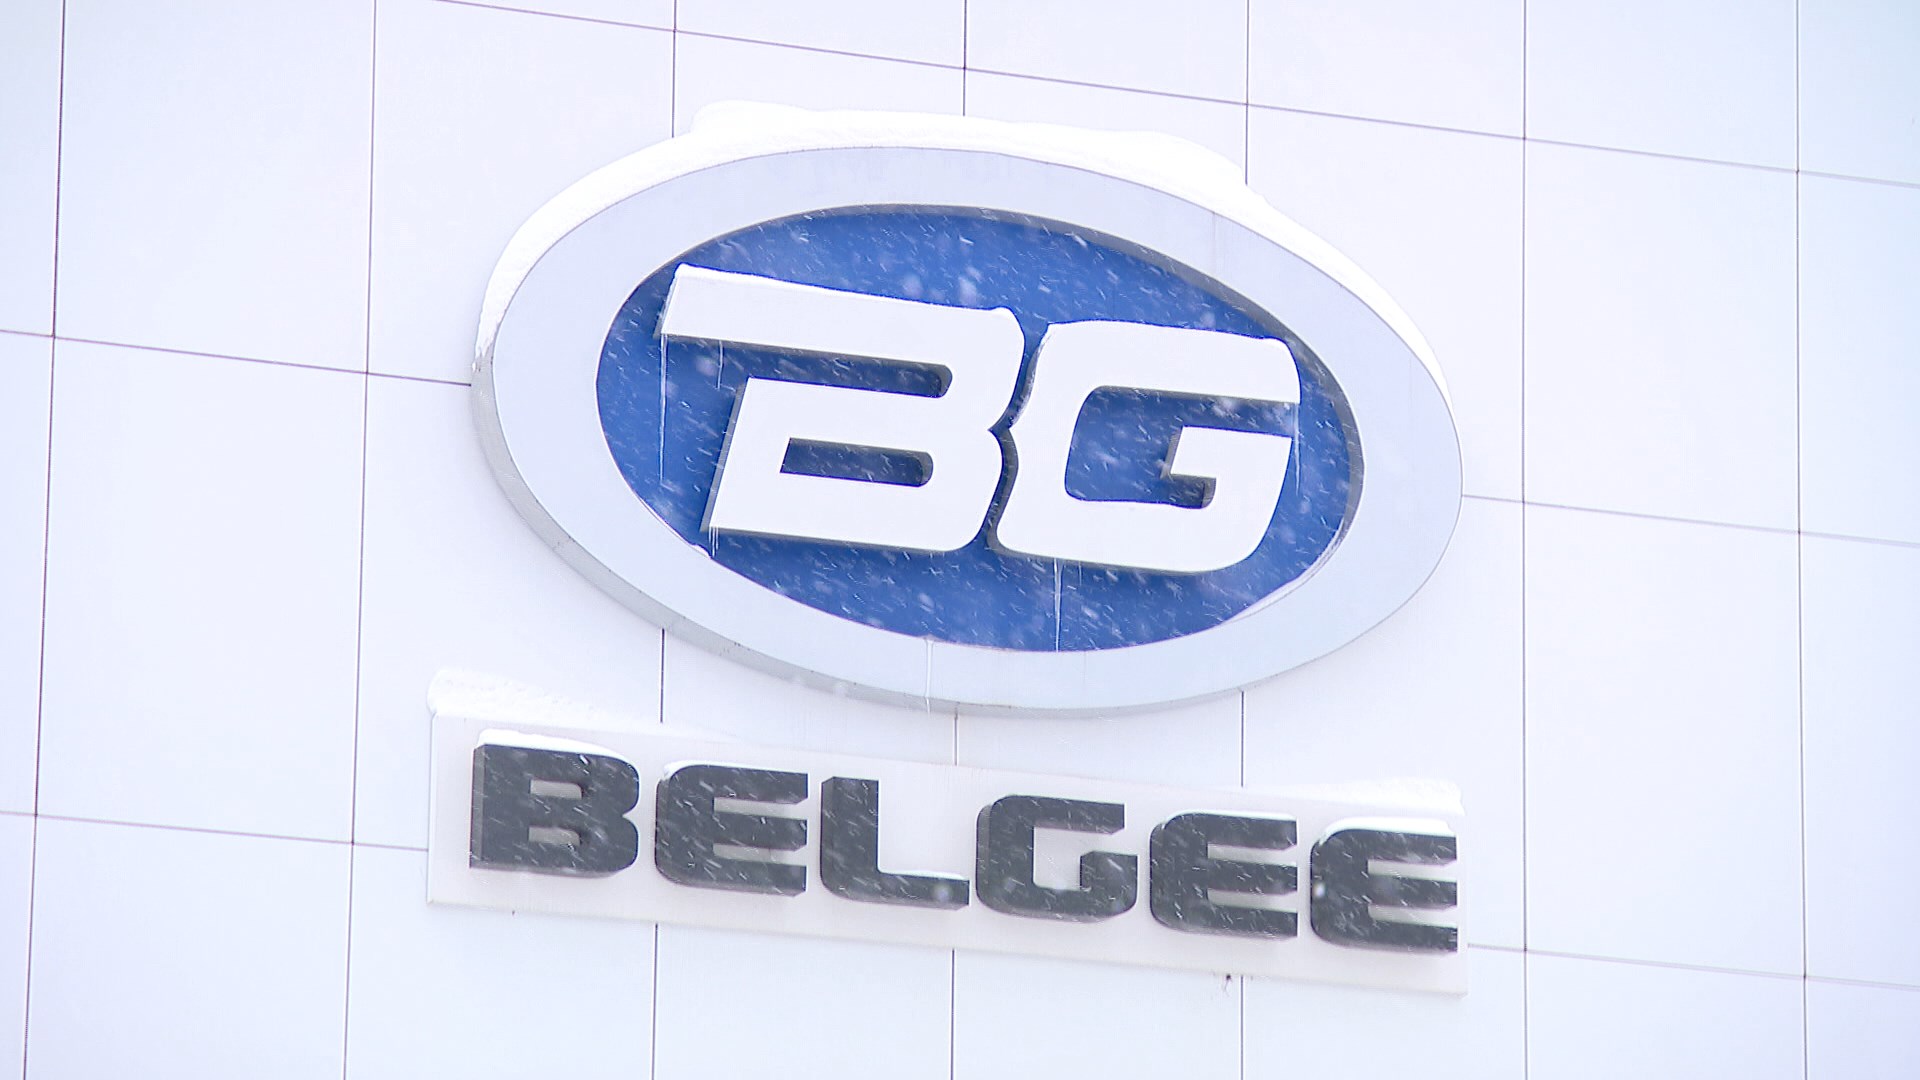 BELGEE to present its electric cars in 2021